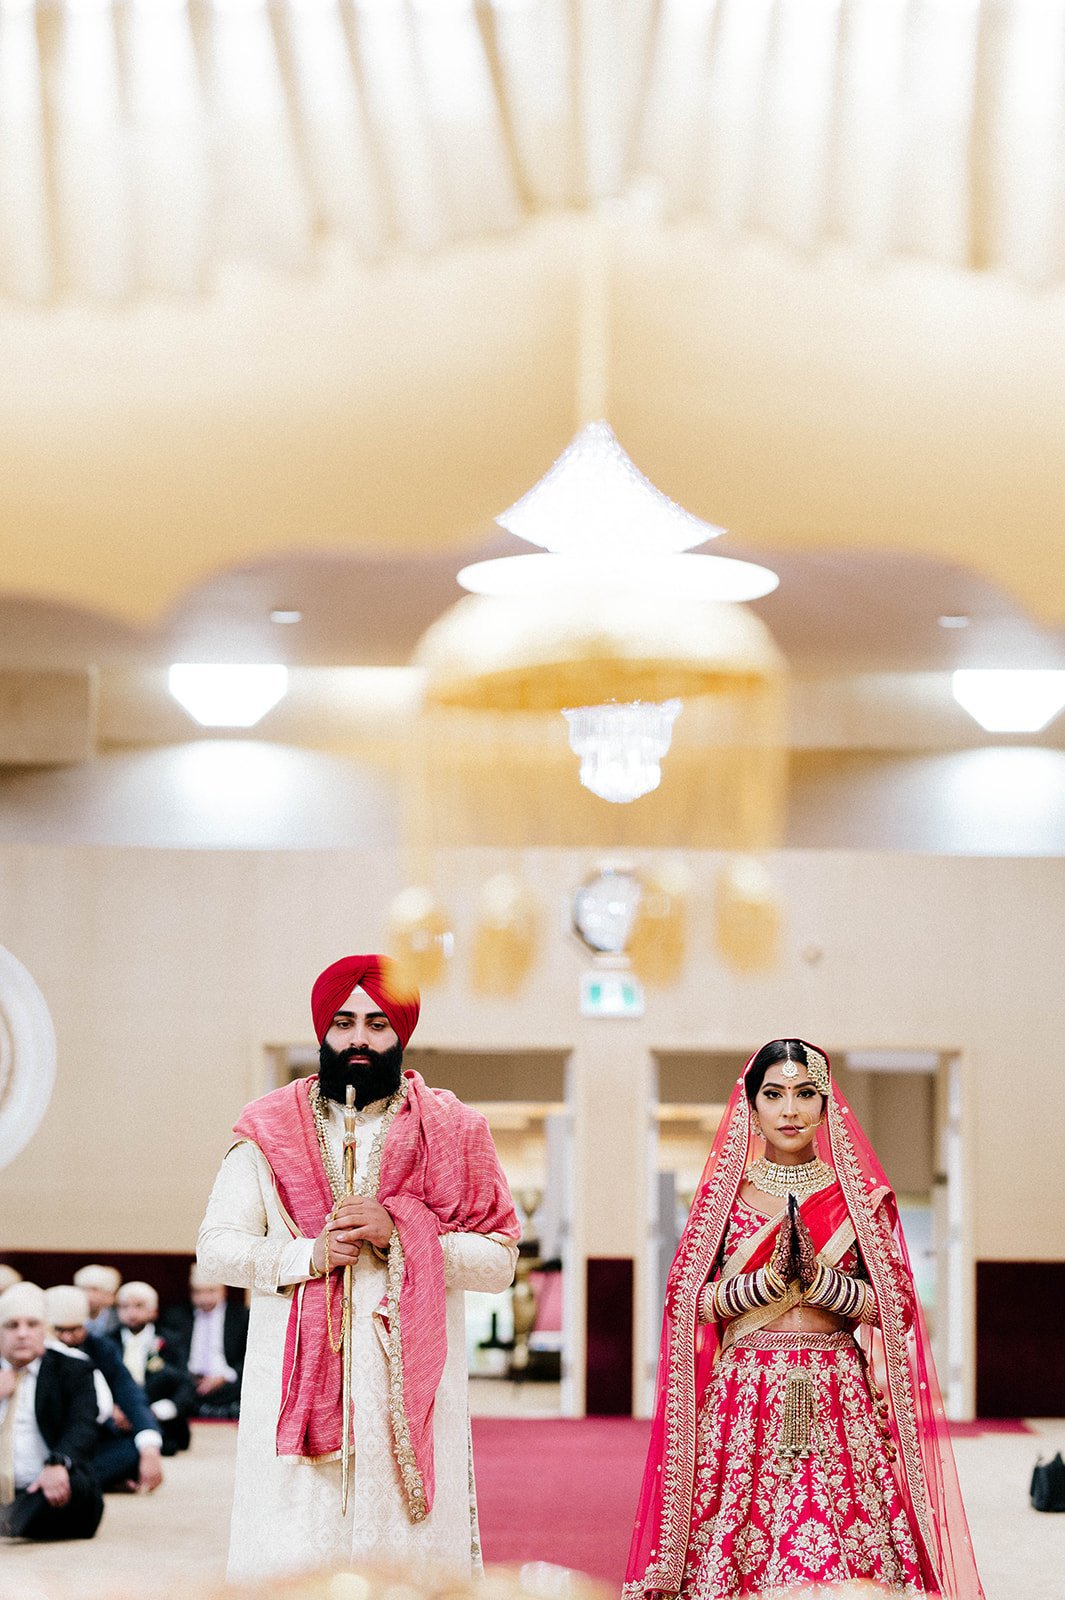 A bride and groom, both dressed in red, stand to pray.